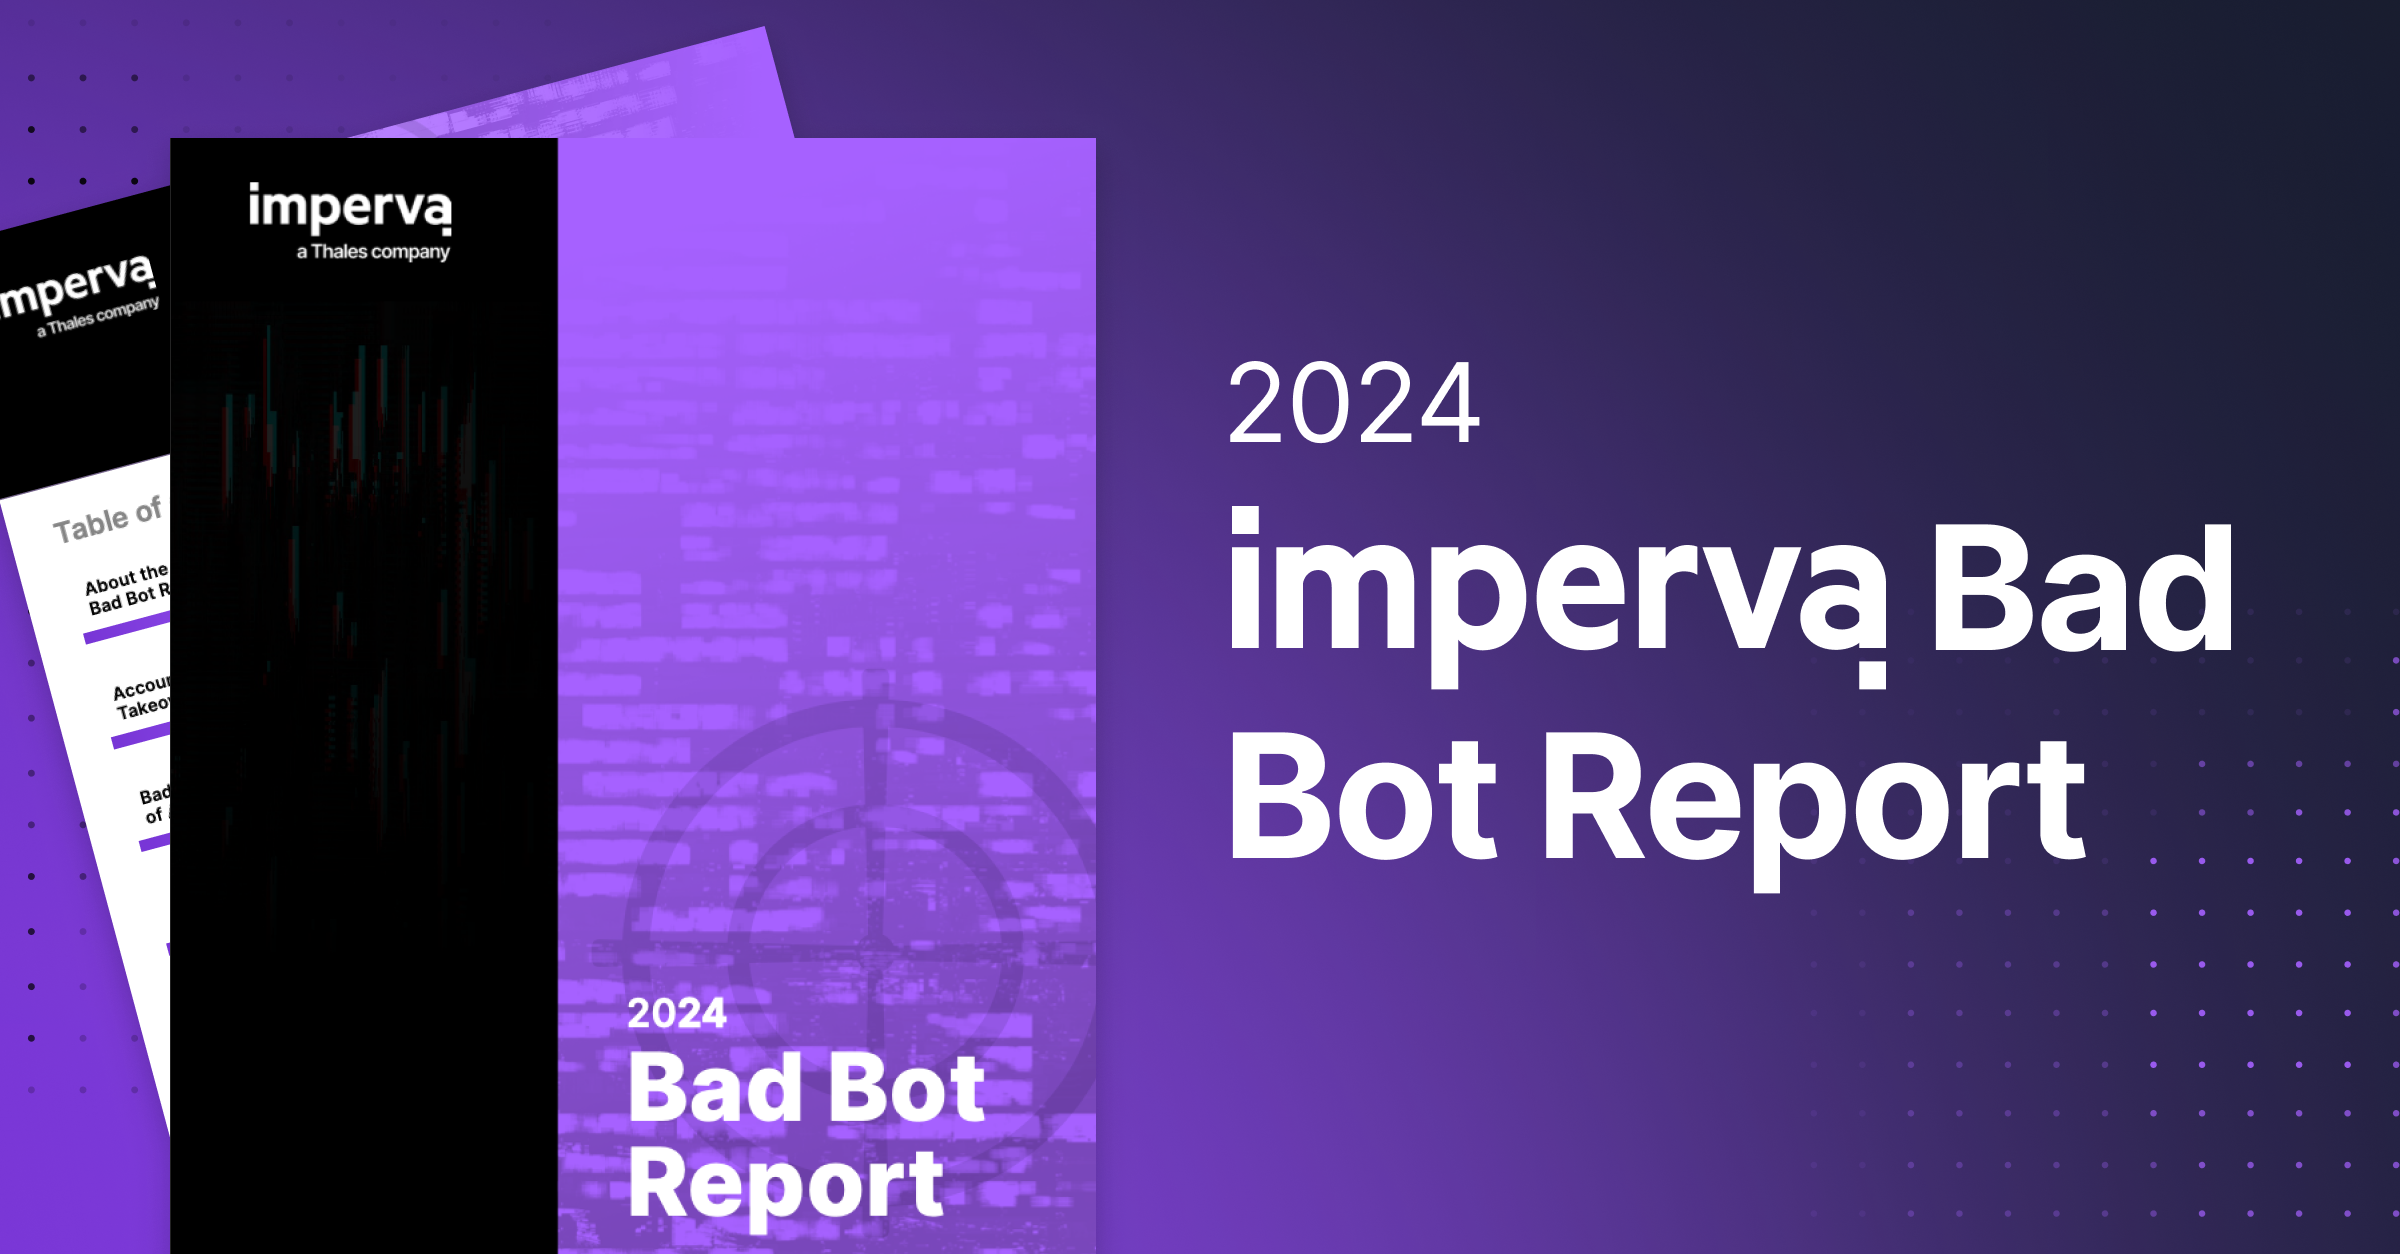 Five Key Takeaways from the 2024 Imperva Bad Bot Report